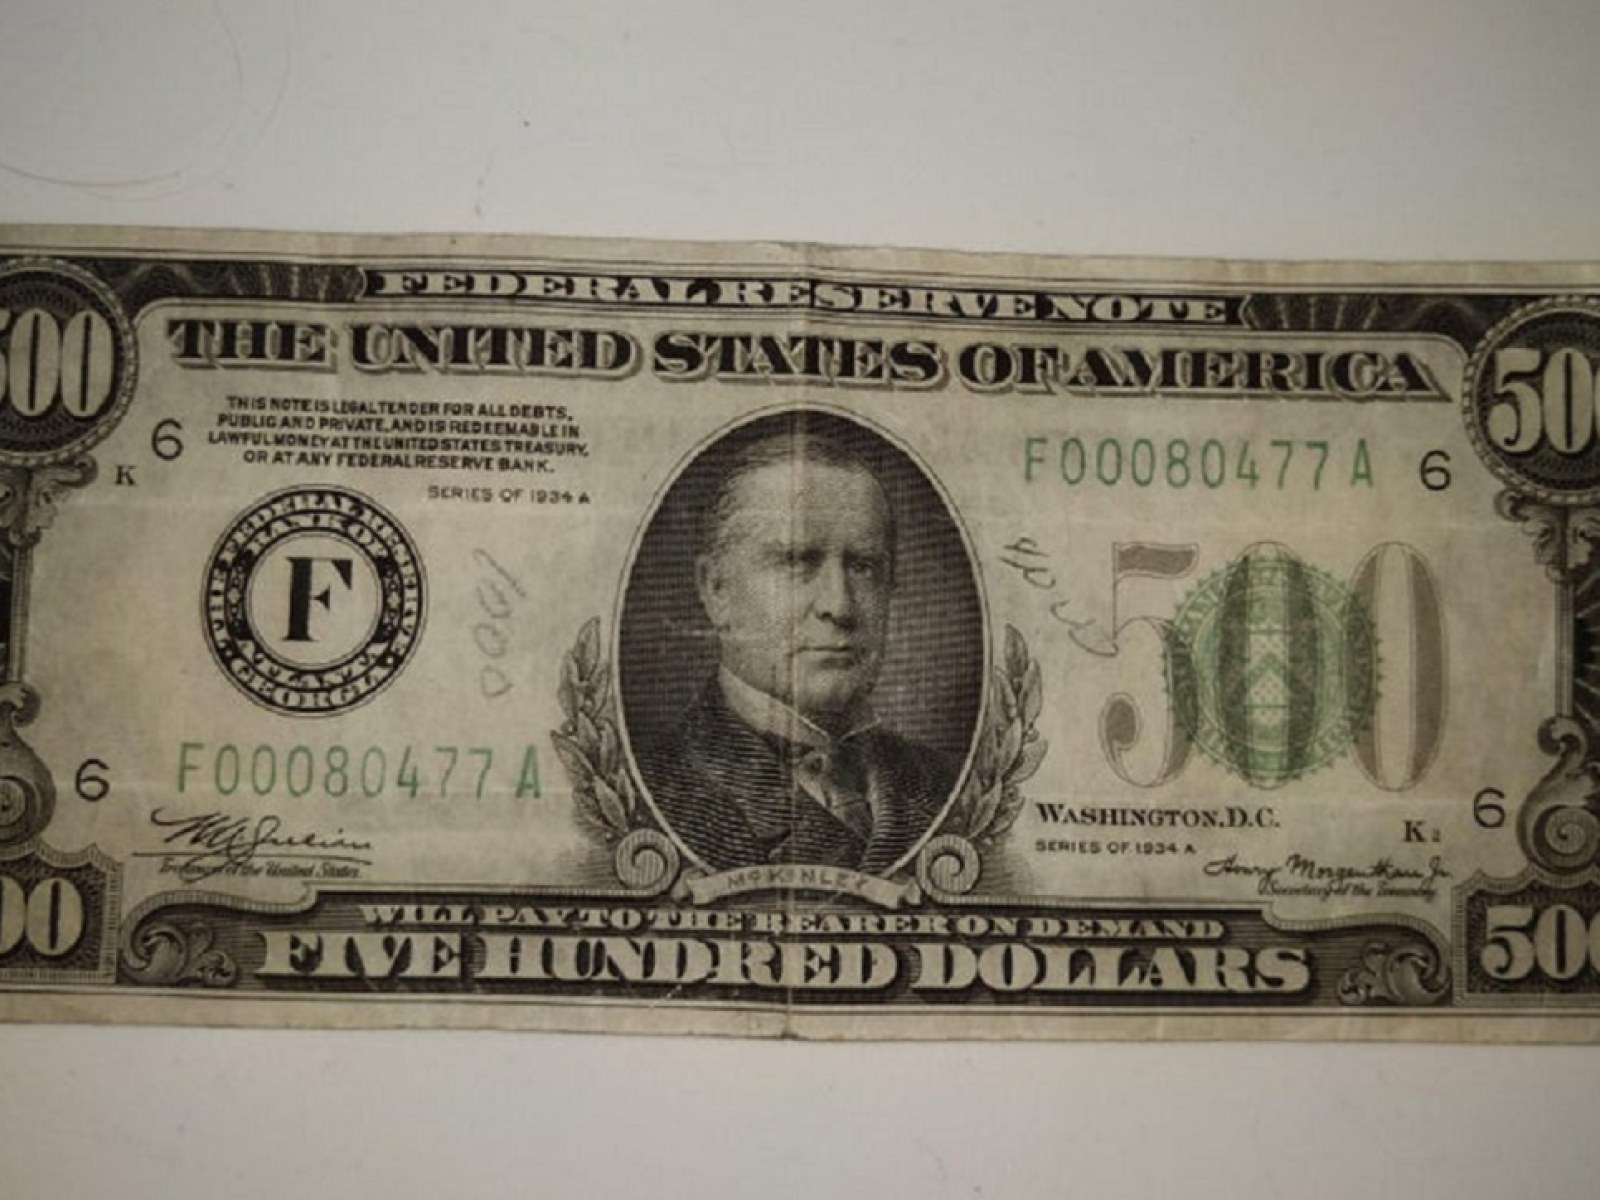 6 Discontinued and Uncommon U.S. Currency Denominations